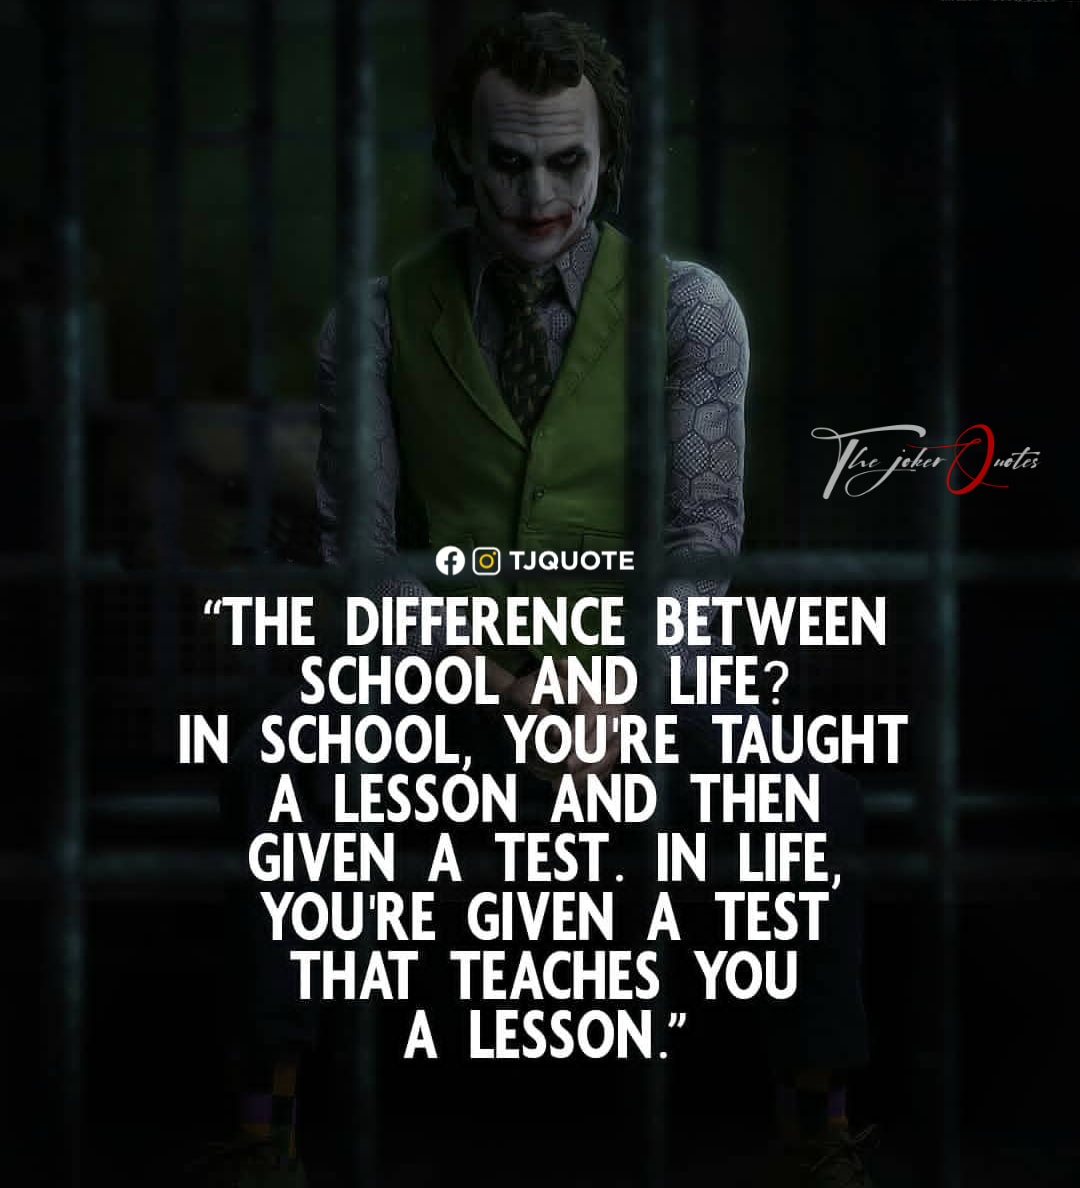 The difference between school and life? In school, you’re taught a lesson and then given a test. In life, you’re given a test that teaches you a lesson.